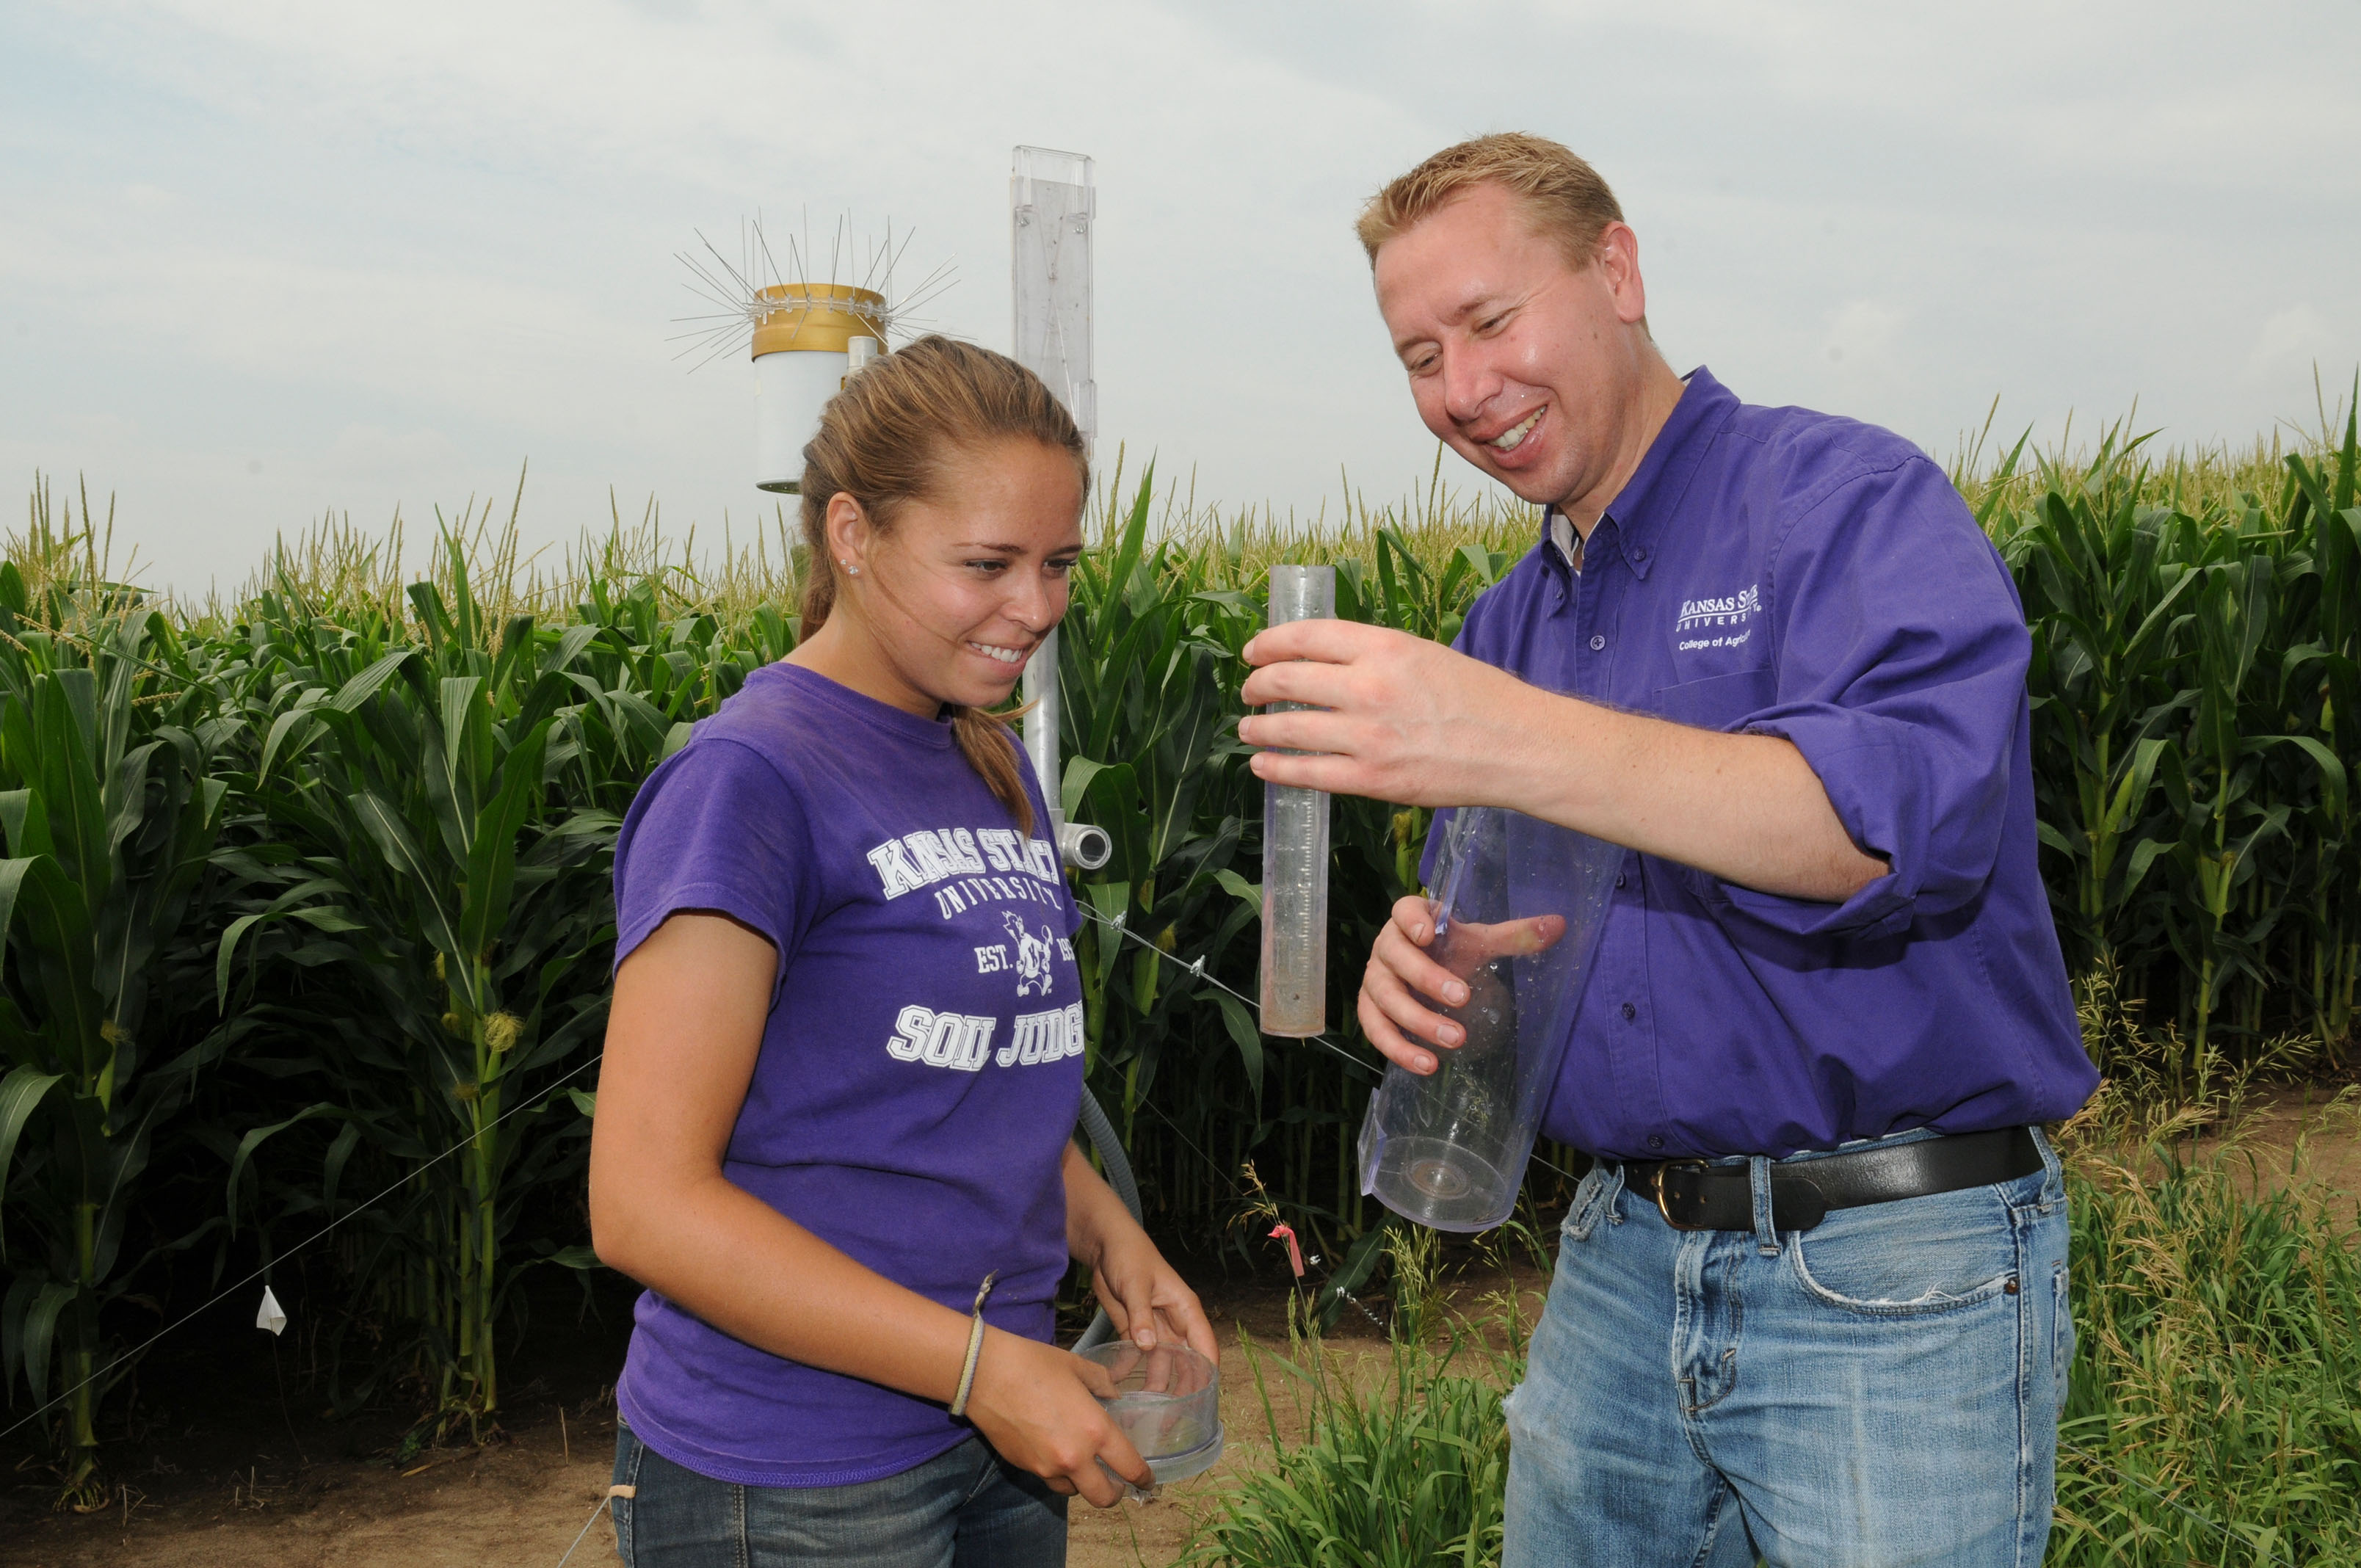 Student gathering samples in corn field